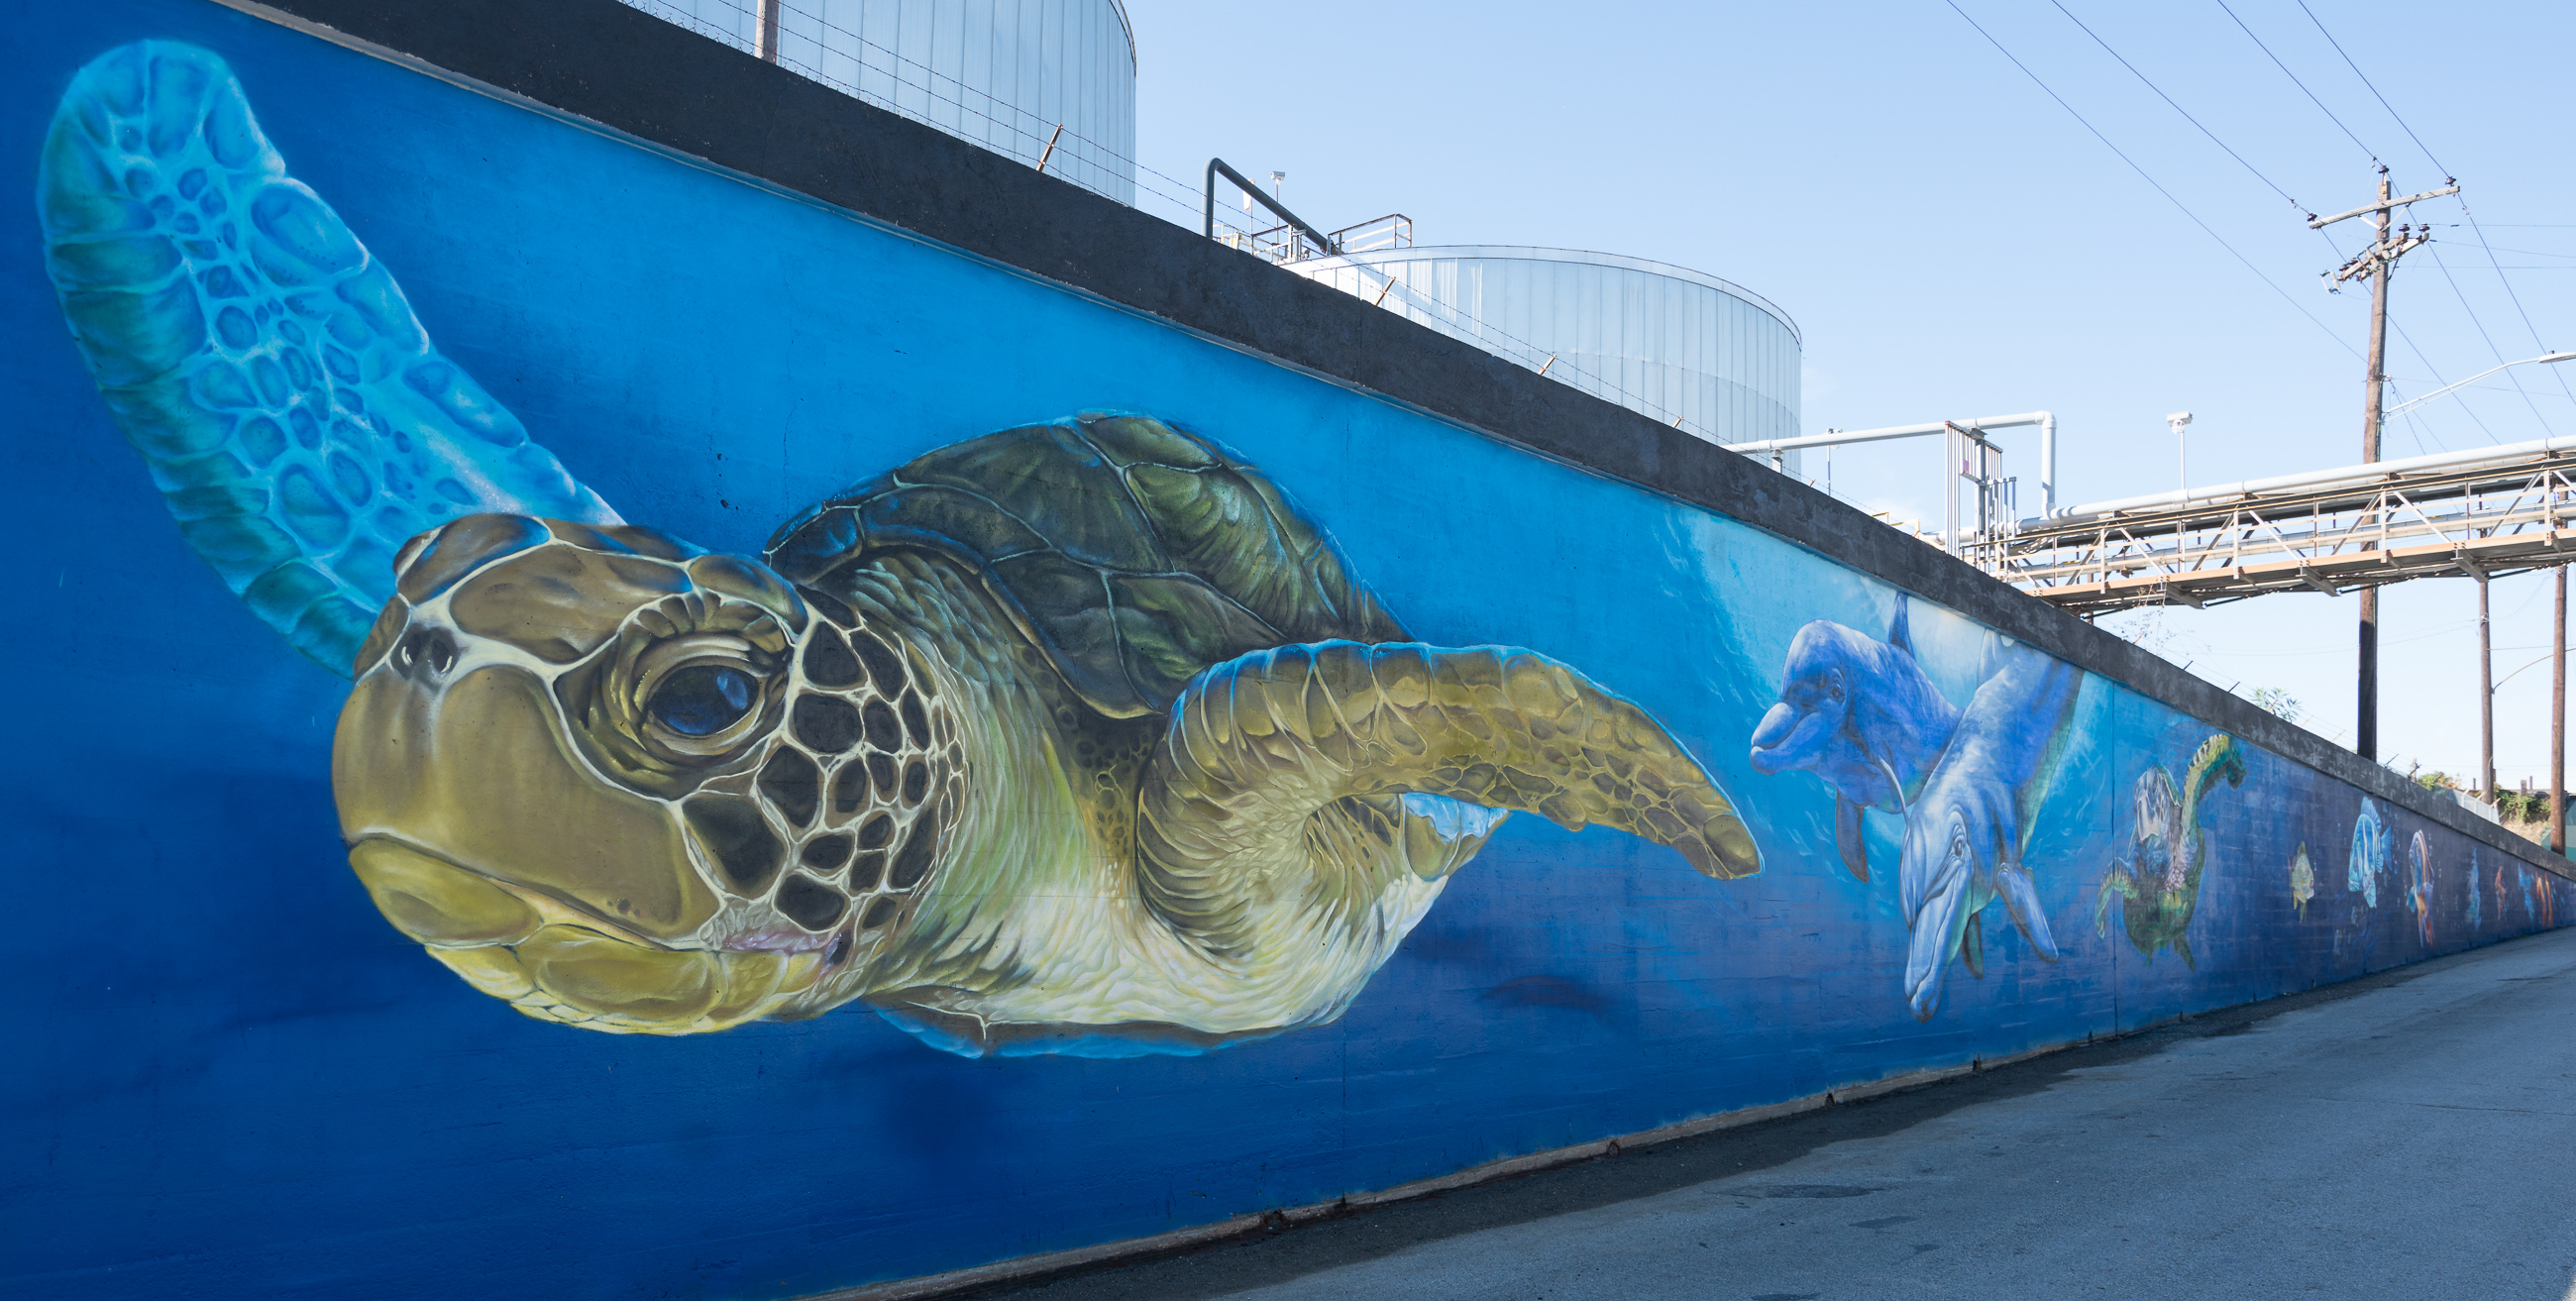 NPR: Massive Mural Of Underwater Sea Life Pops Up In The East End